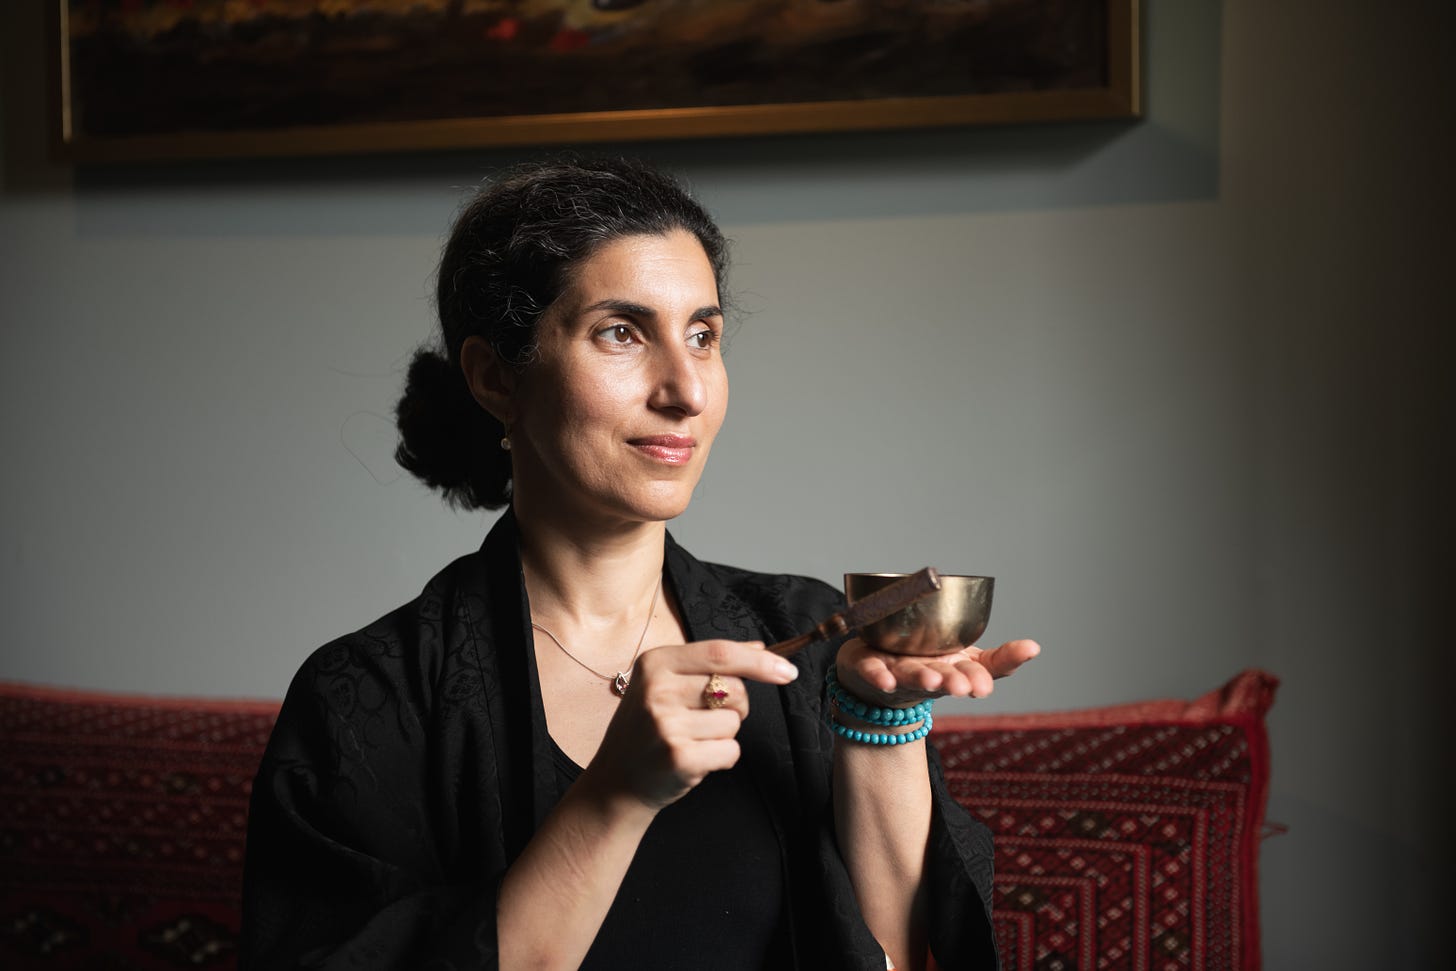 An Iranian-American woman with a gentle smile stares off to the right while gently tapping a small golden singing bowl in the palm of her hand.